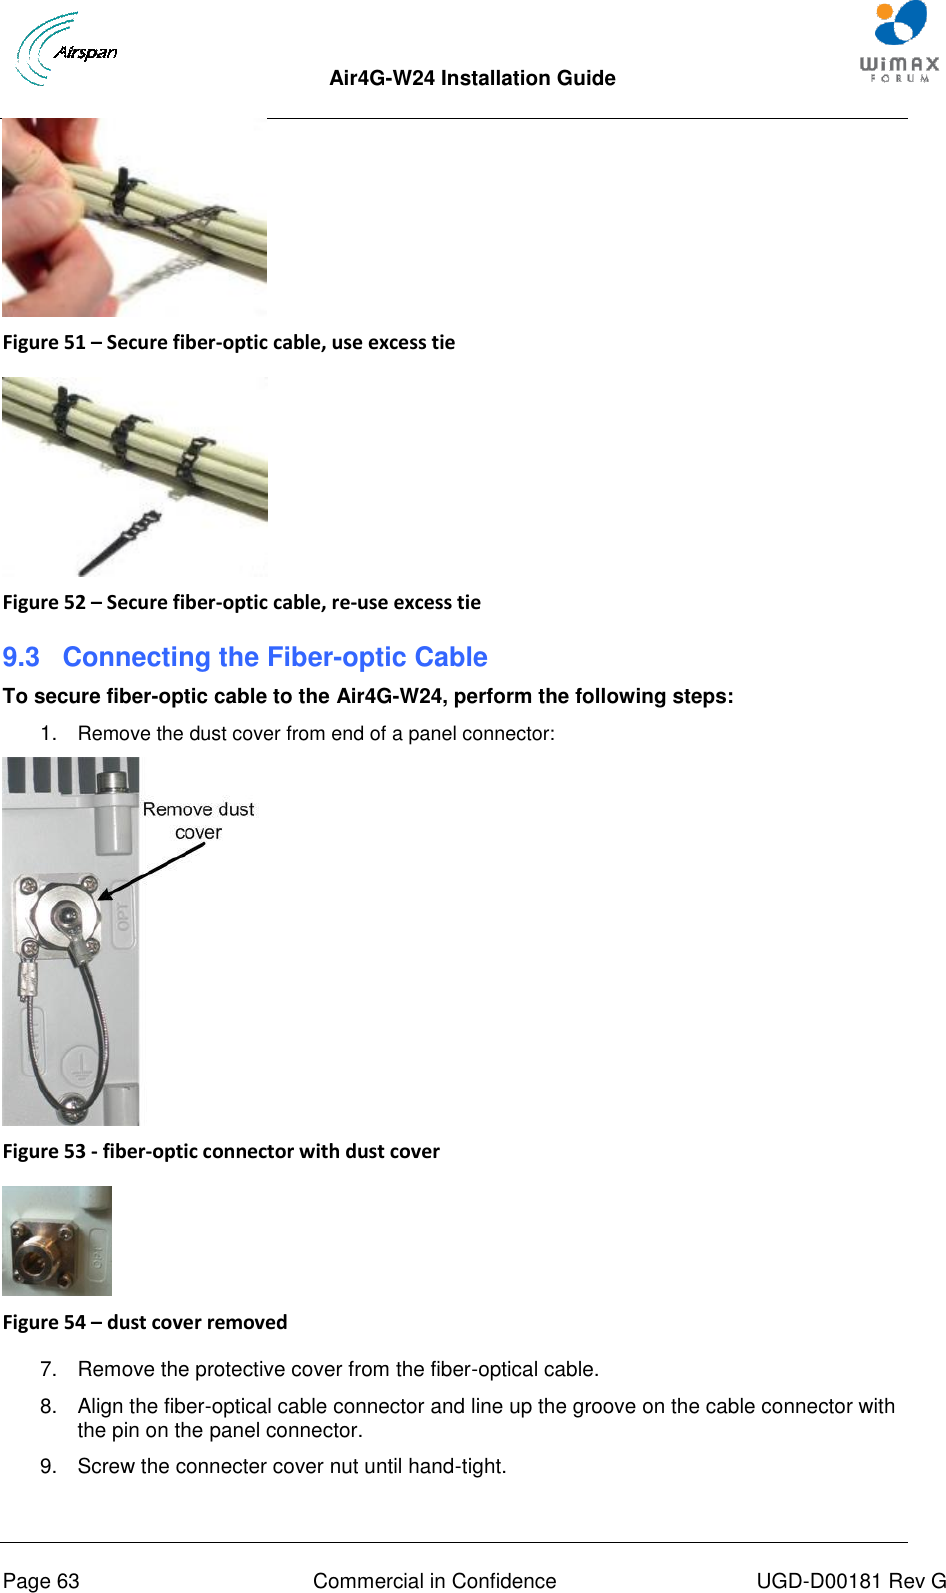  Air4G-W24 Installation Guide       Page 63  Commercial in Confidence  UGD-D00181 Rev G  Figure 51 – Secure fiber-optic cable, use excess tie   Figure 52 – Secure fiber-optic cable, re-use excess tie 9.3  Connecting the Fiber-optic Cable To secure fiber-optic cable to the Air4G-W24, perform the following steps: 1.  Remove the dust cover from end of a panel connector:  Figure 53 - fiber-optic connector with dust cover   Figure 54 – dust cover removed  7.  Remove the protective cover from the fiber-optical cable. 8.  Align the fiber-optical cable connector and line up the groove on the cable connector with the pin on the panel connector. 9.  Screw the connecter cover nut until hand-tight. 